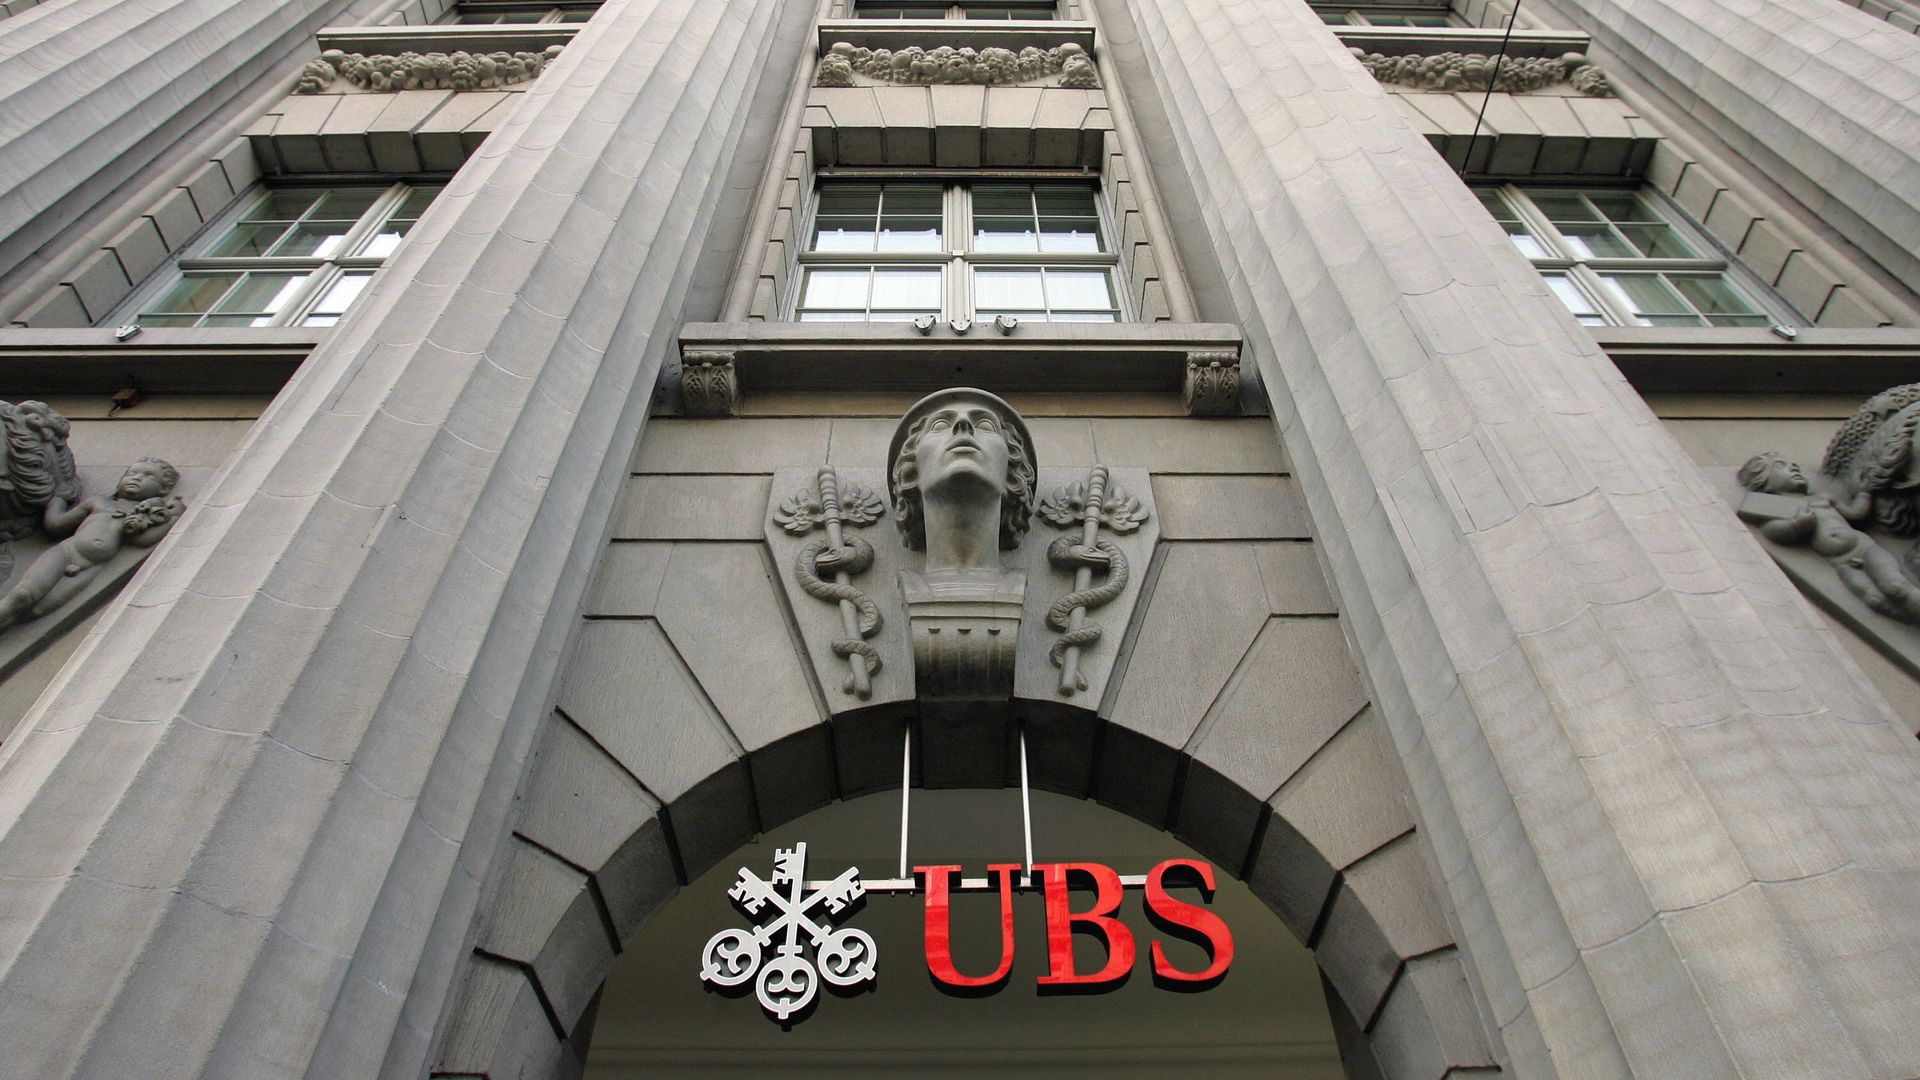 The Swiss Bank USB's headquarters in Zurich